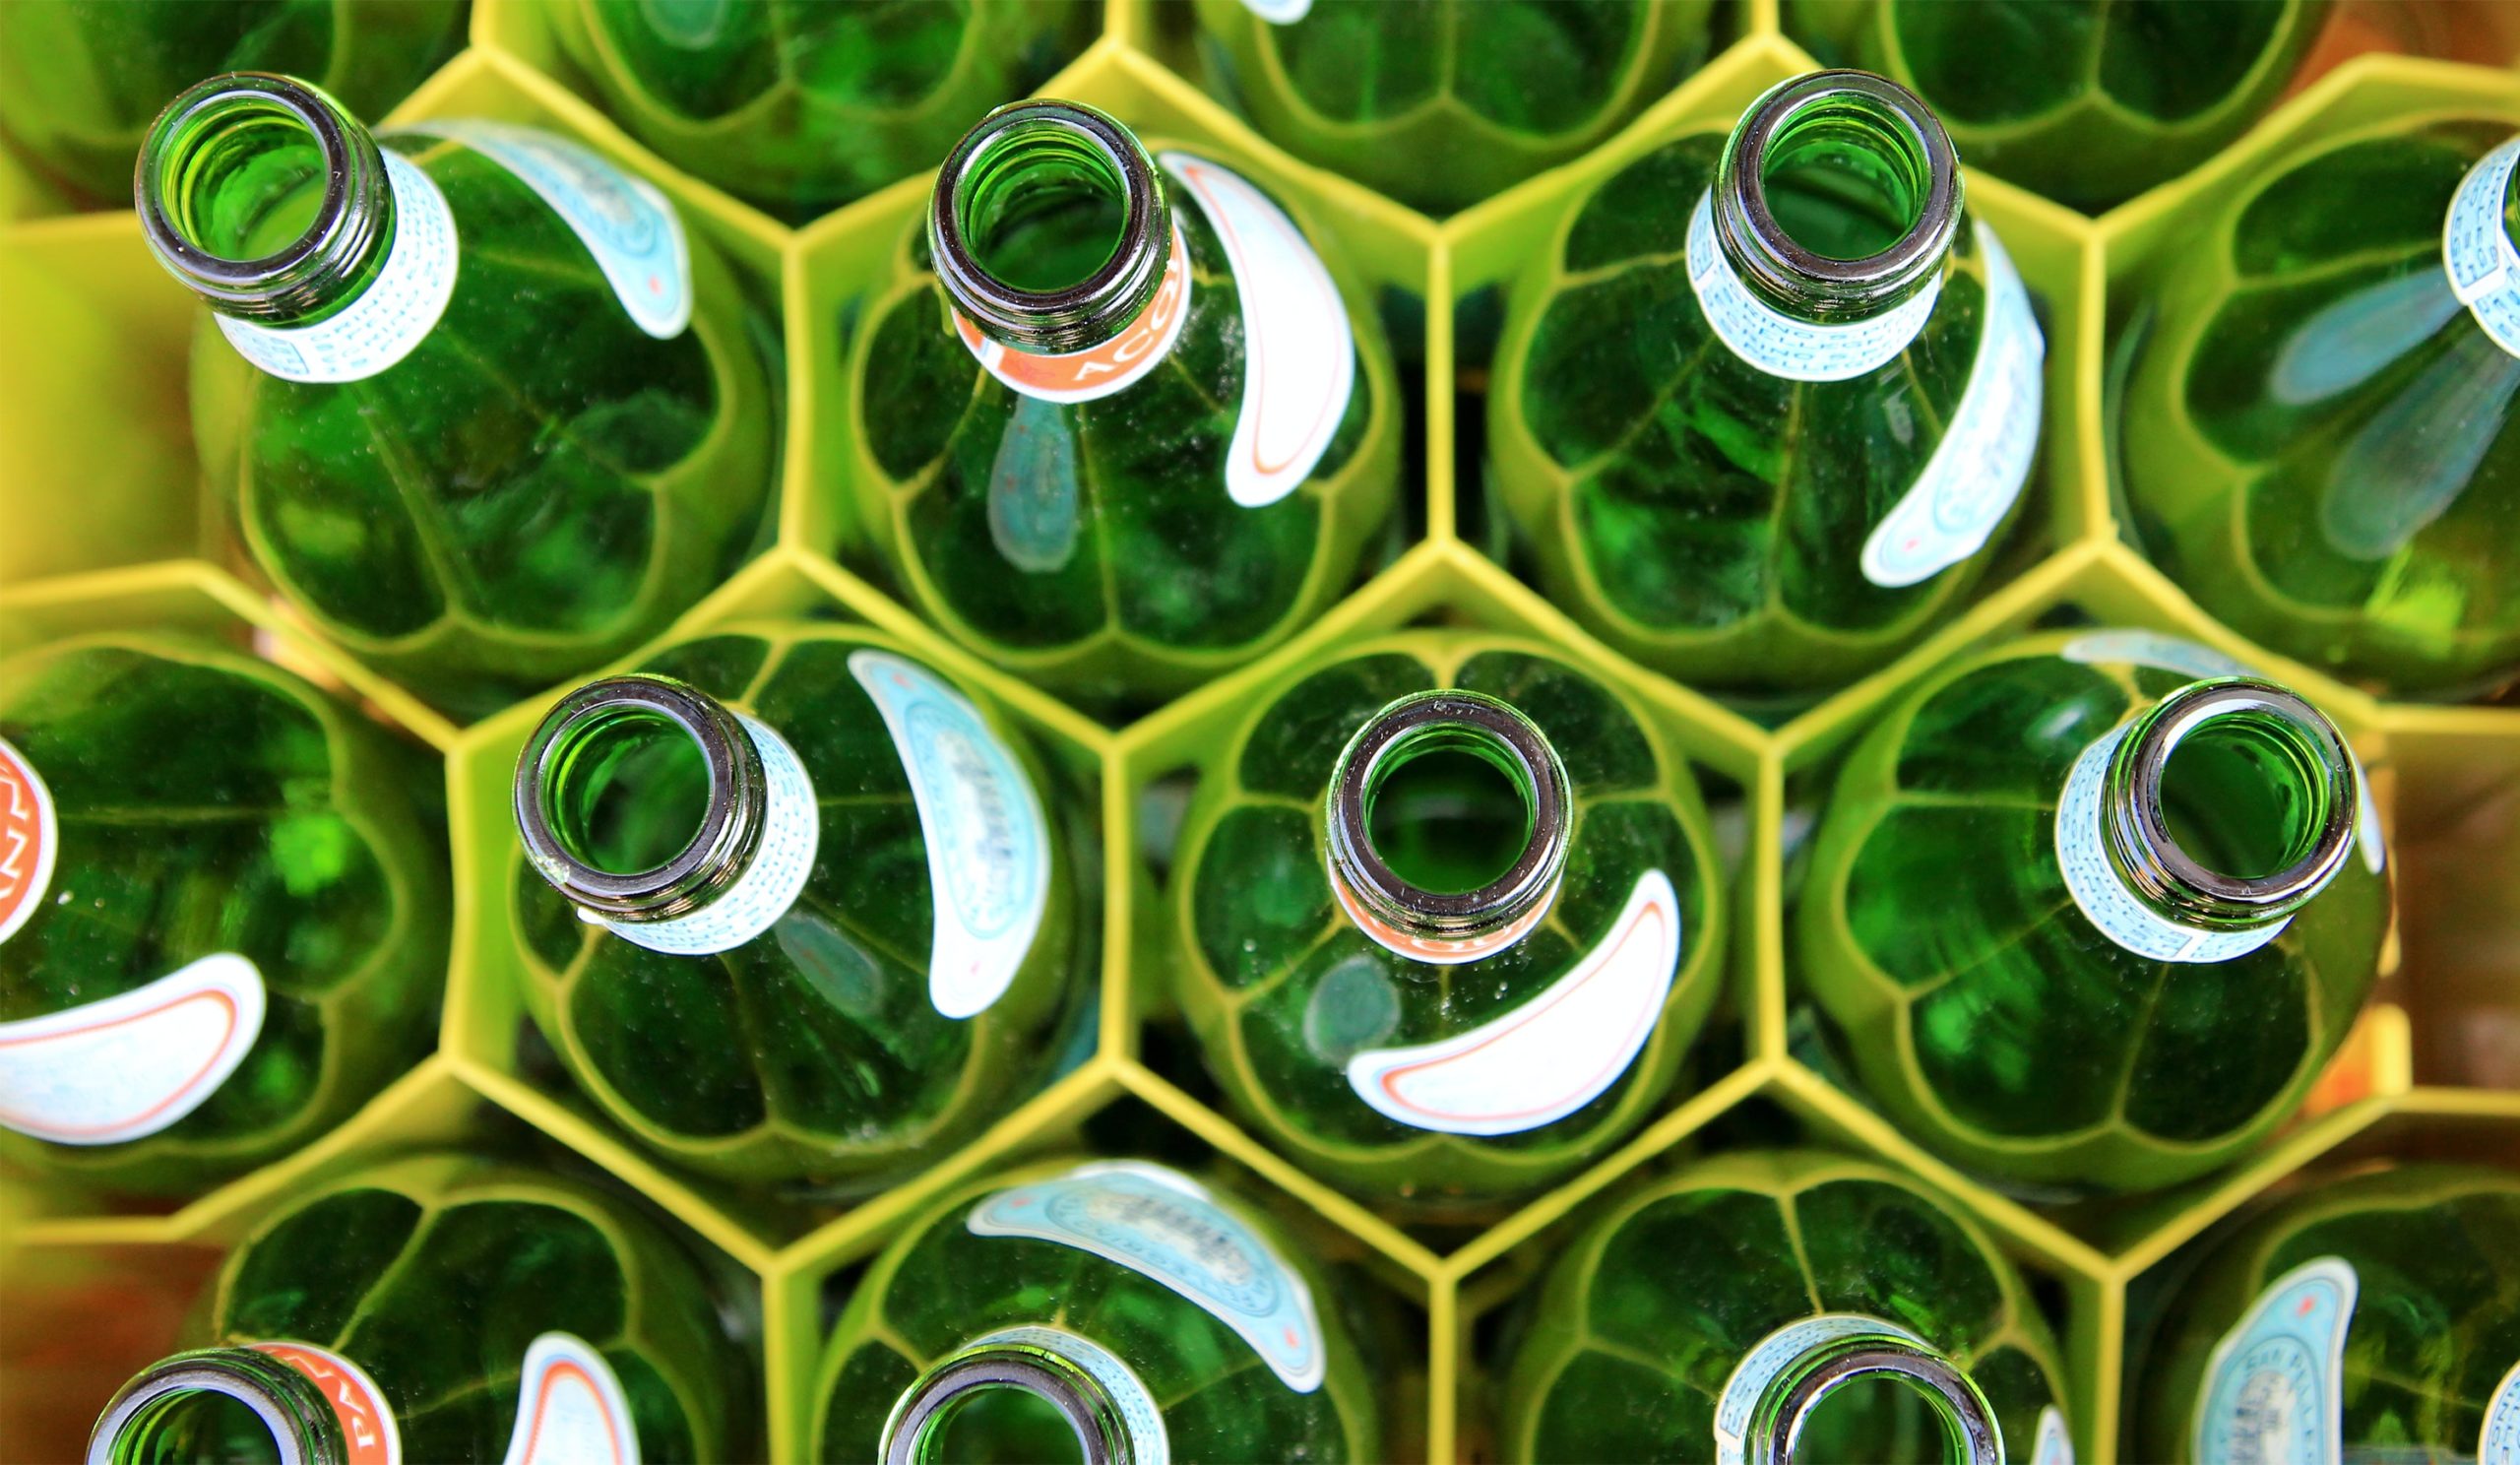 7 Things you can recycle that will surprise you